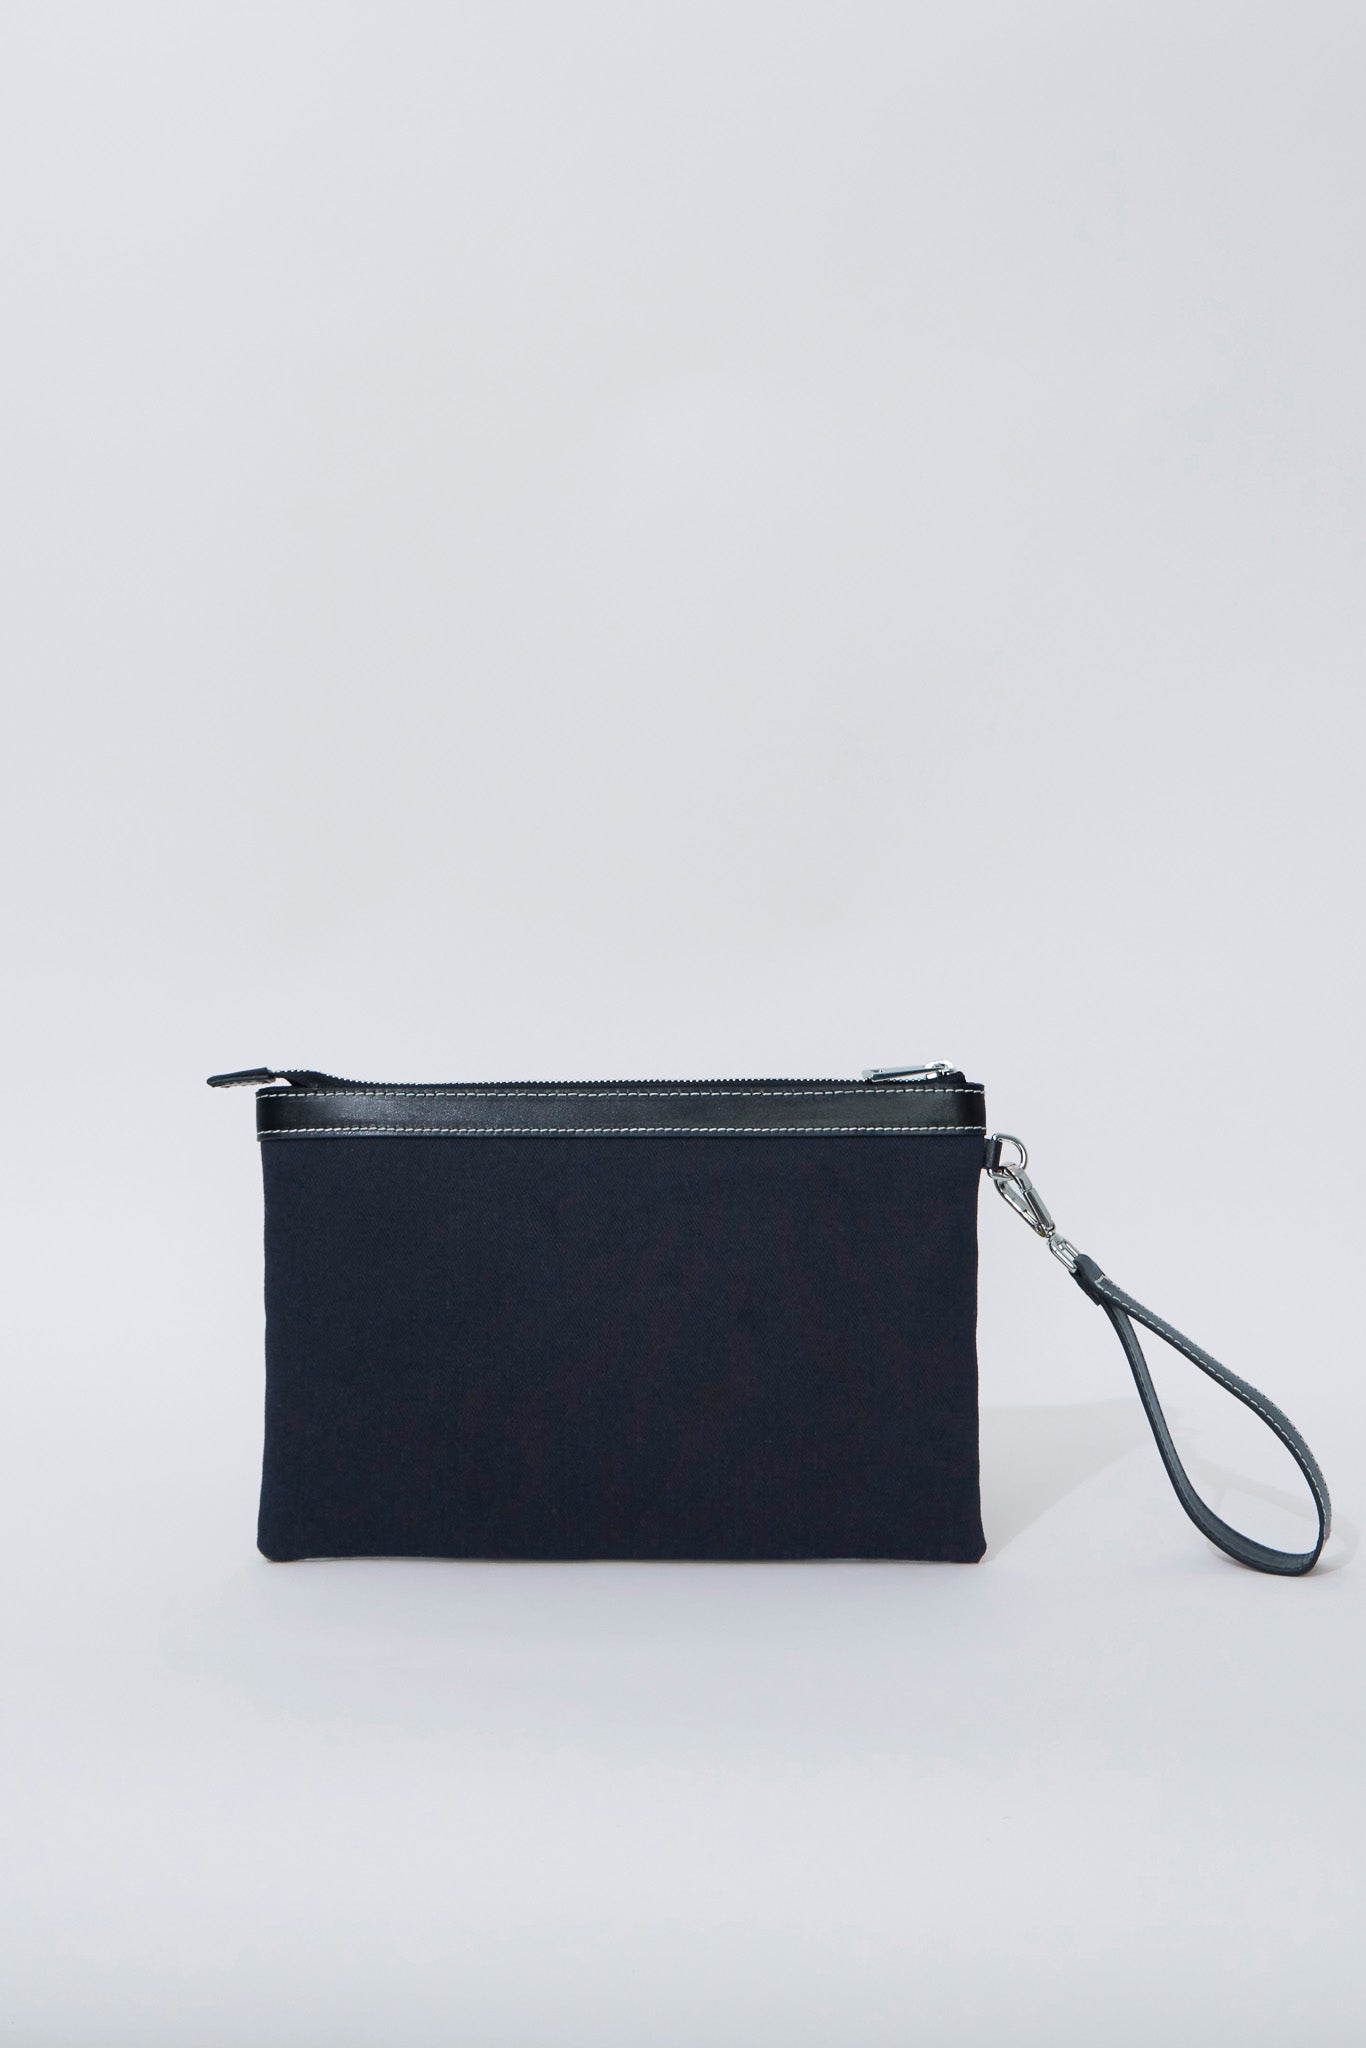 STITCHED CLUTCH IN NAVY AND BLACK